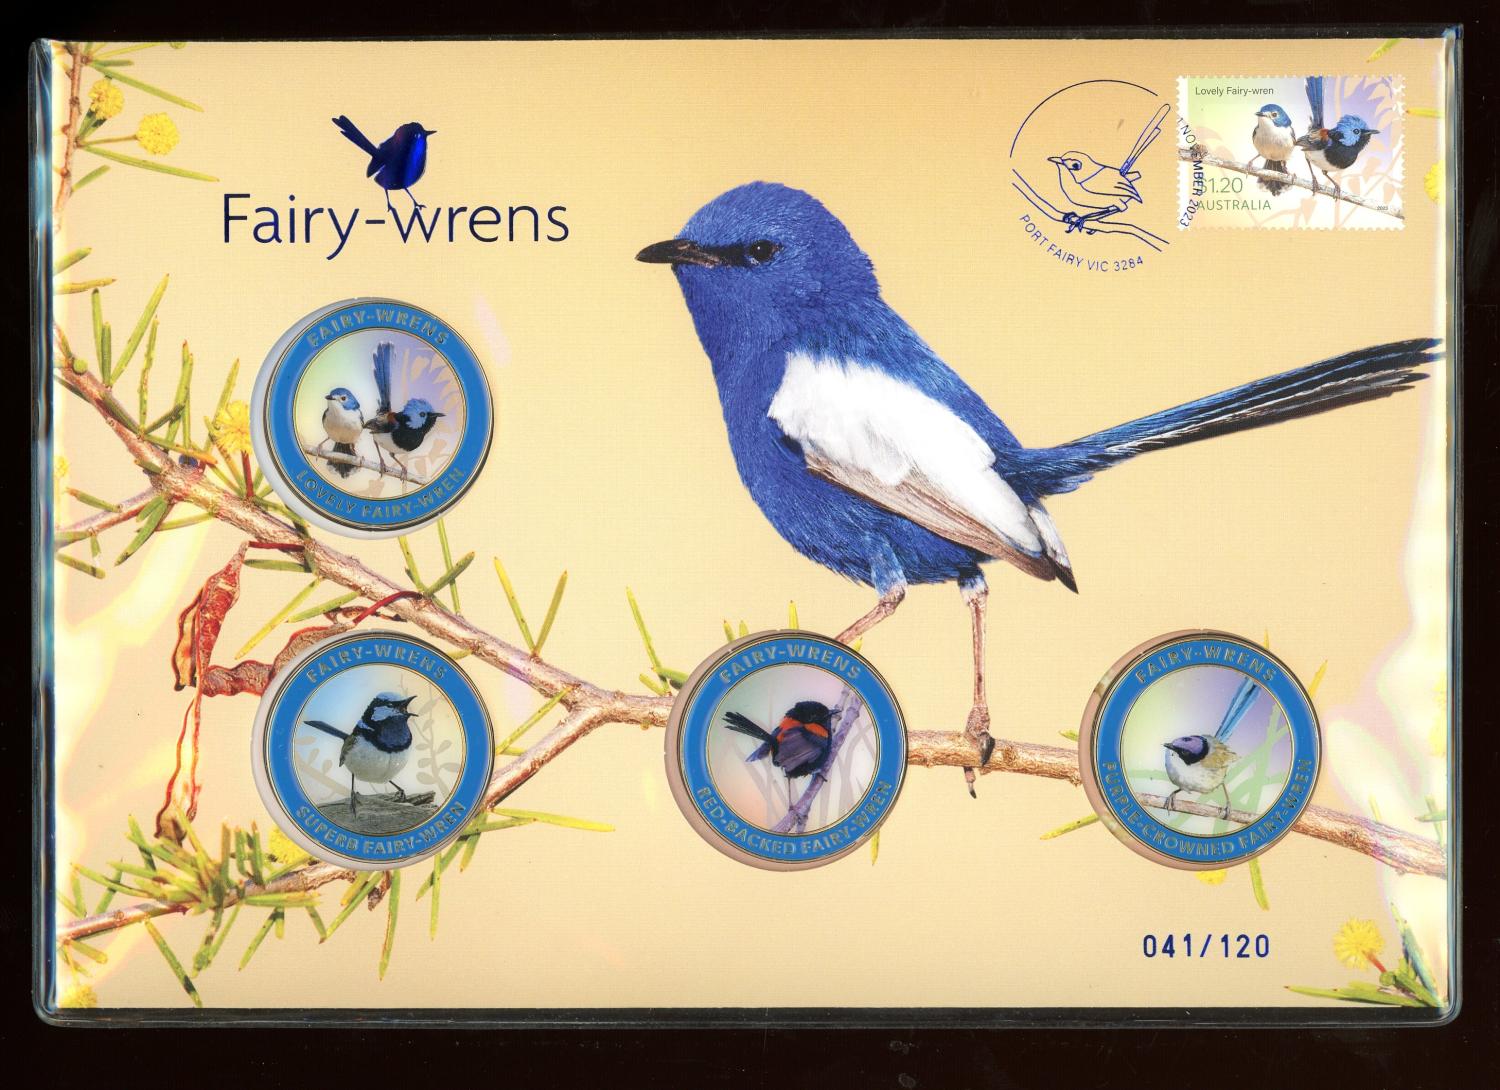 Thumbnail for 2023 Fairy Wrens Limited Edition Postal Medallion Cover with Foil Overprint 041-120